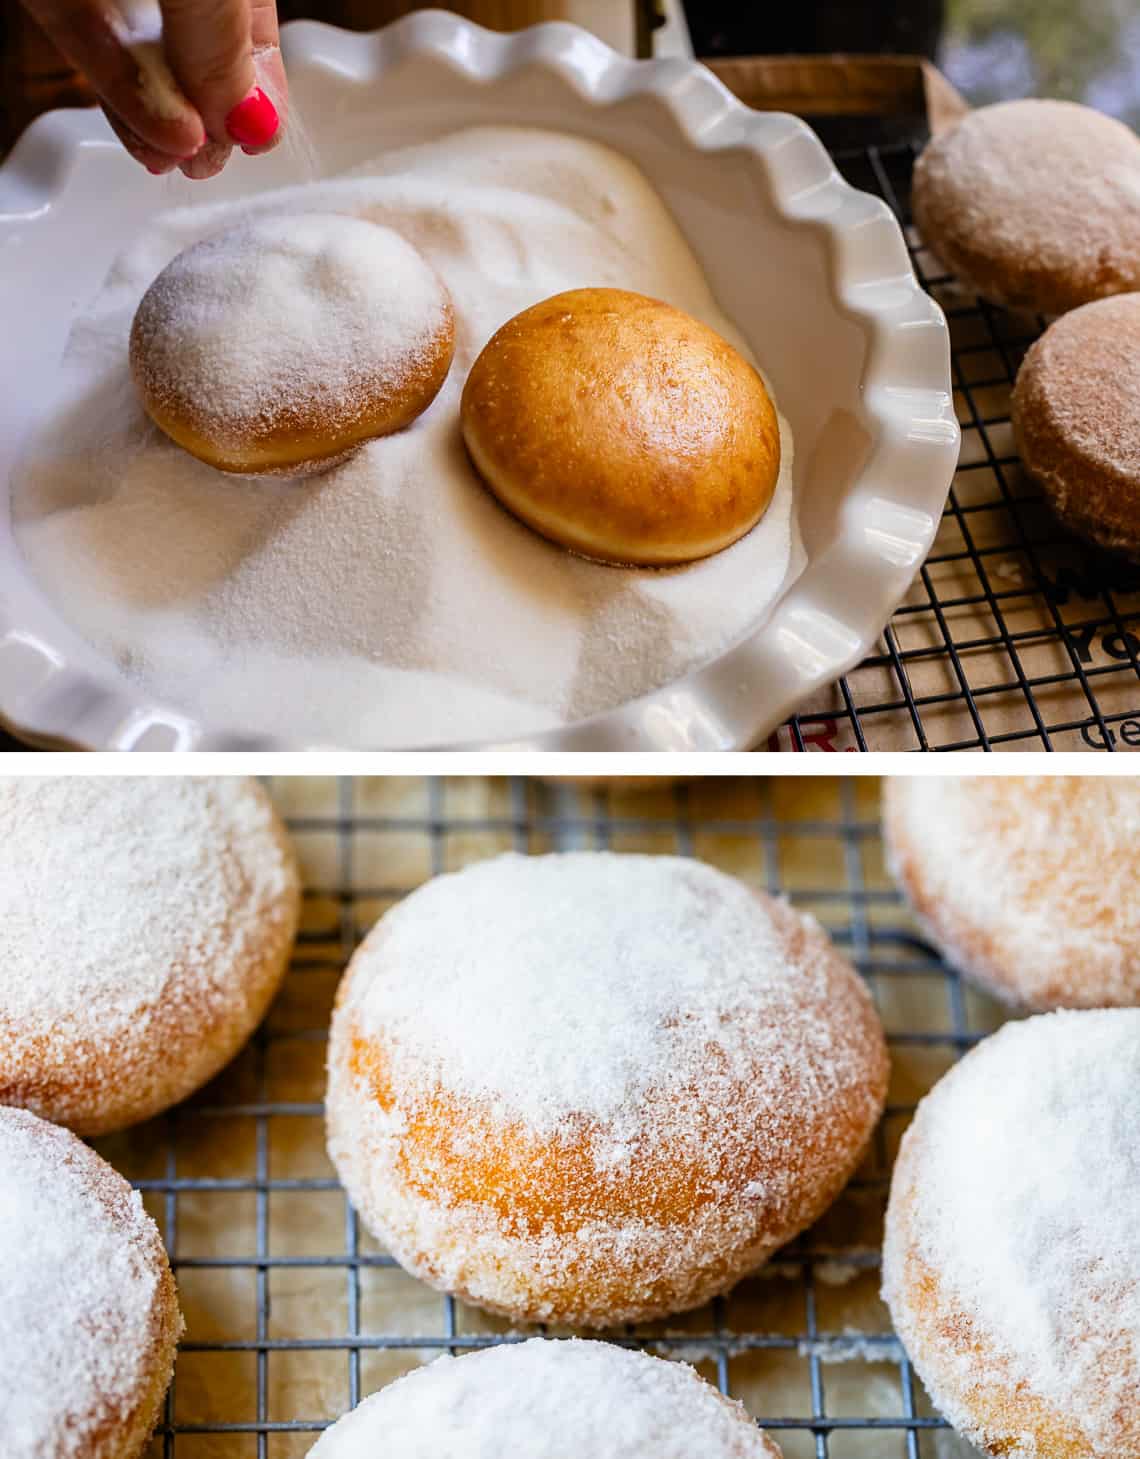 top fried donuts being coated with sugar, bottom a fully and generously coated donut.